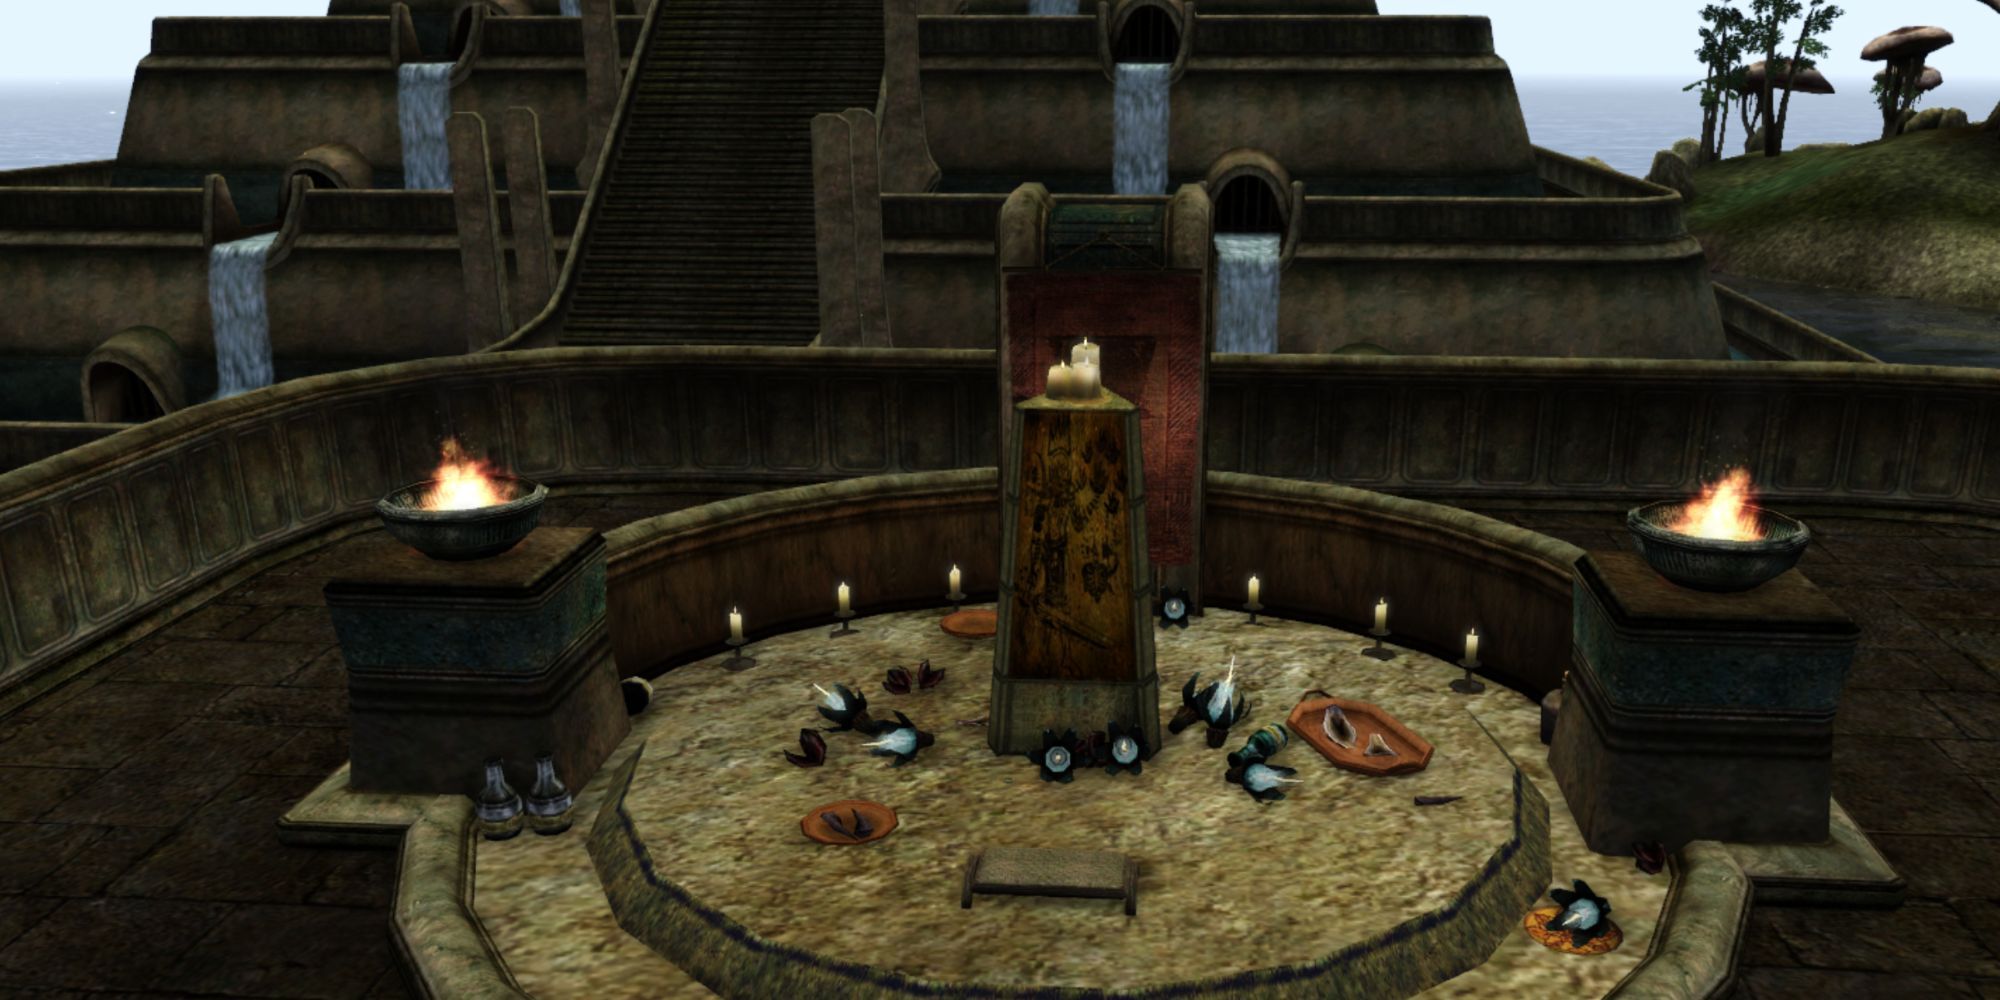 Morrowind Shrine Of Daring With Buildings In The Background